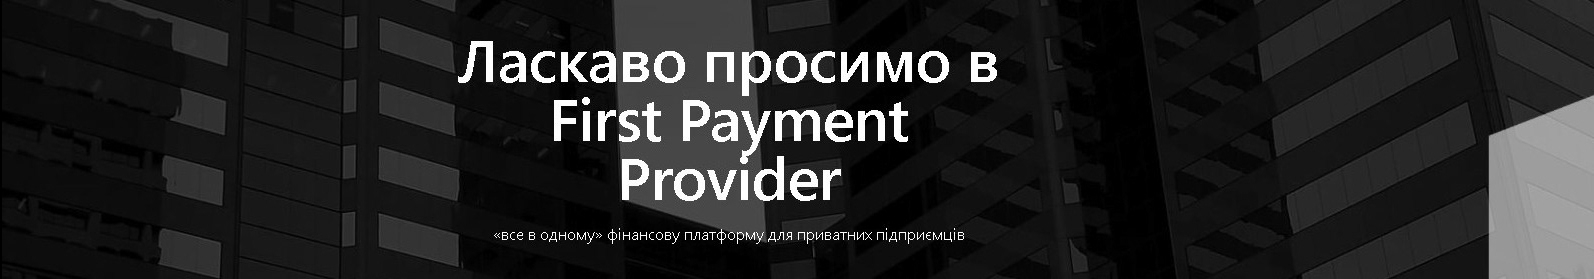 First Payment Provider UA's profile banner